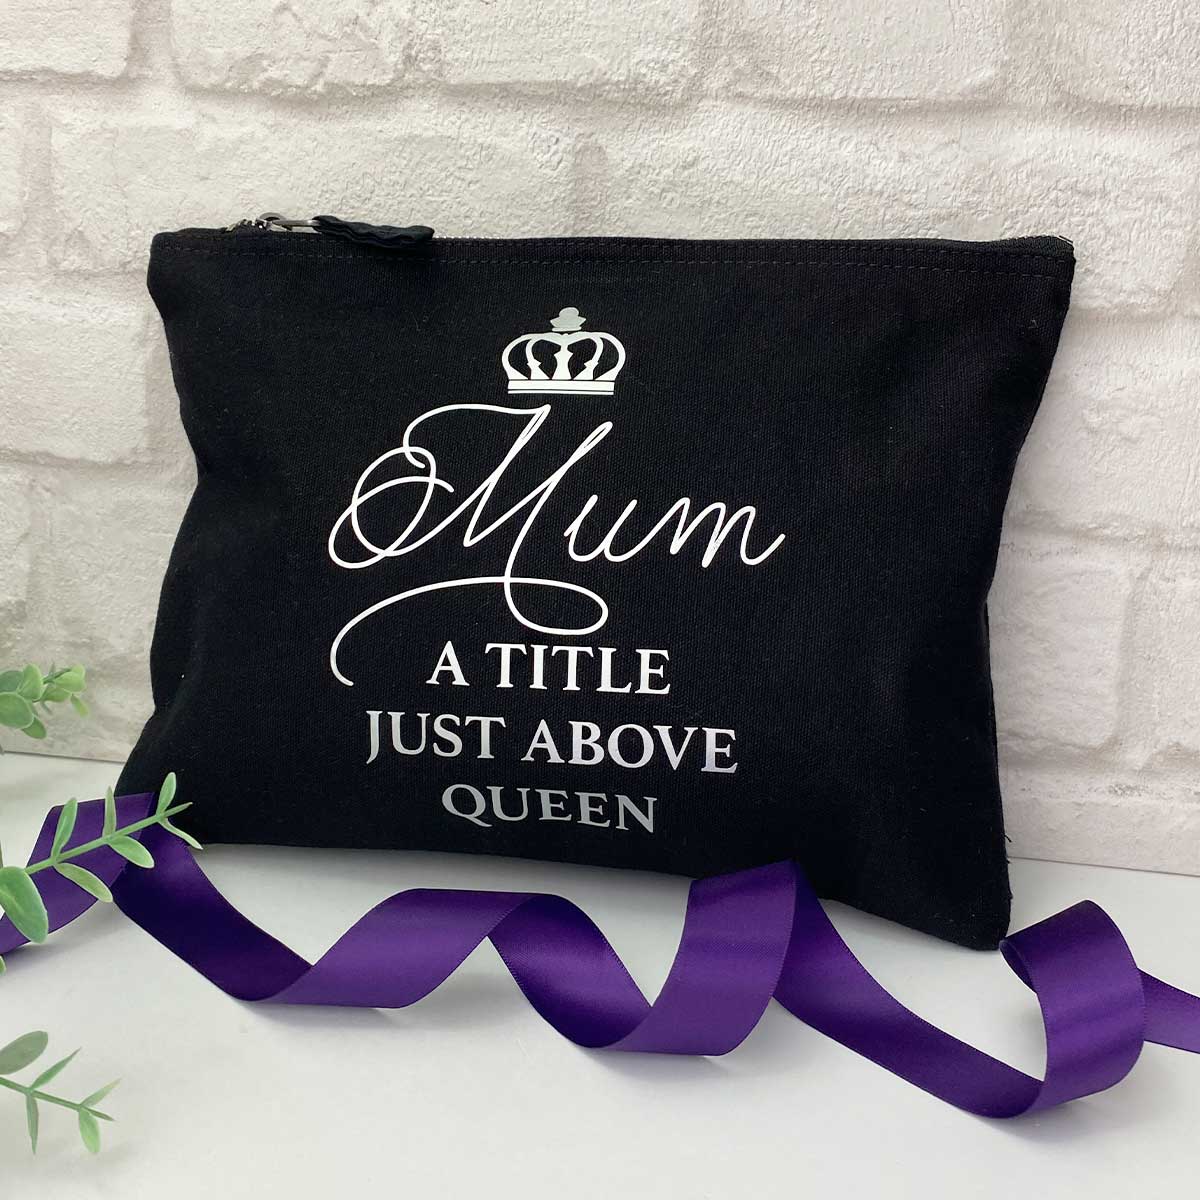 Mum A Title Just Above Queen Accessory Bag (Black or Natural)